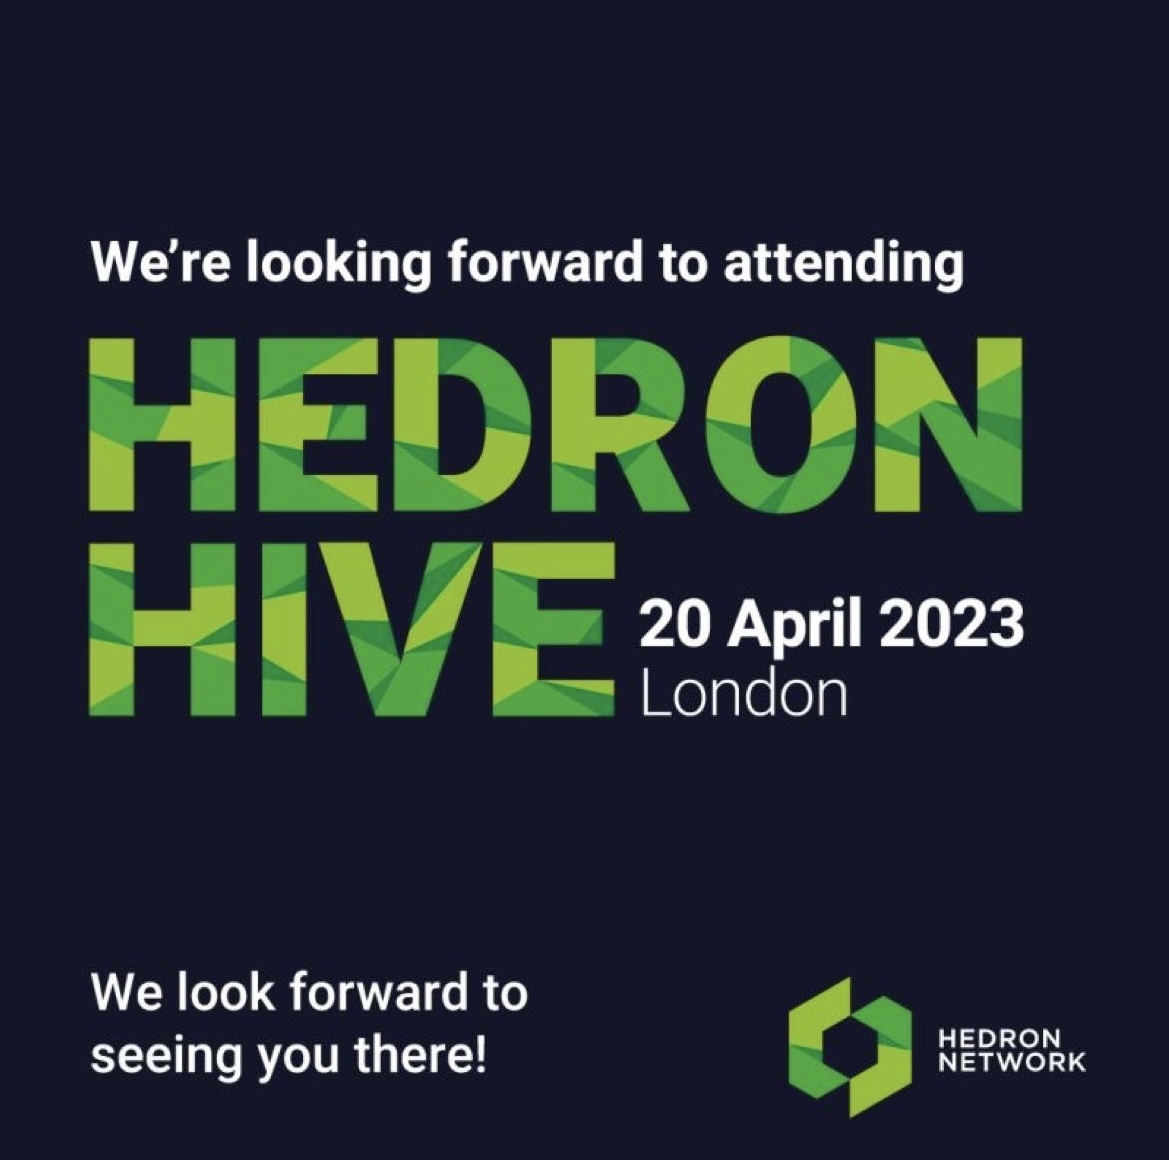 The Hedron Hive is our opportunity to meet with insurers and like minded brokers. 

We’re on our way!